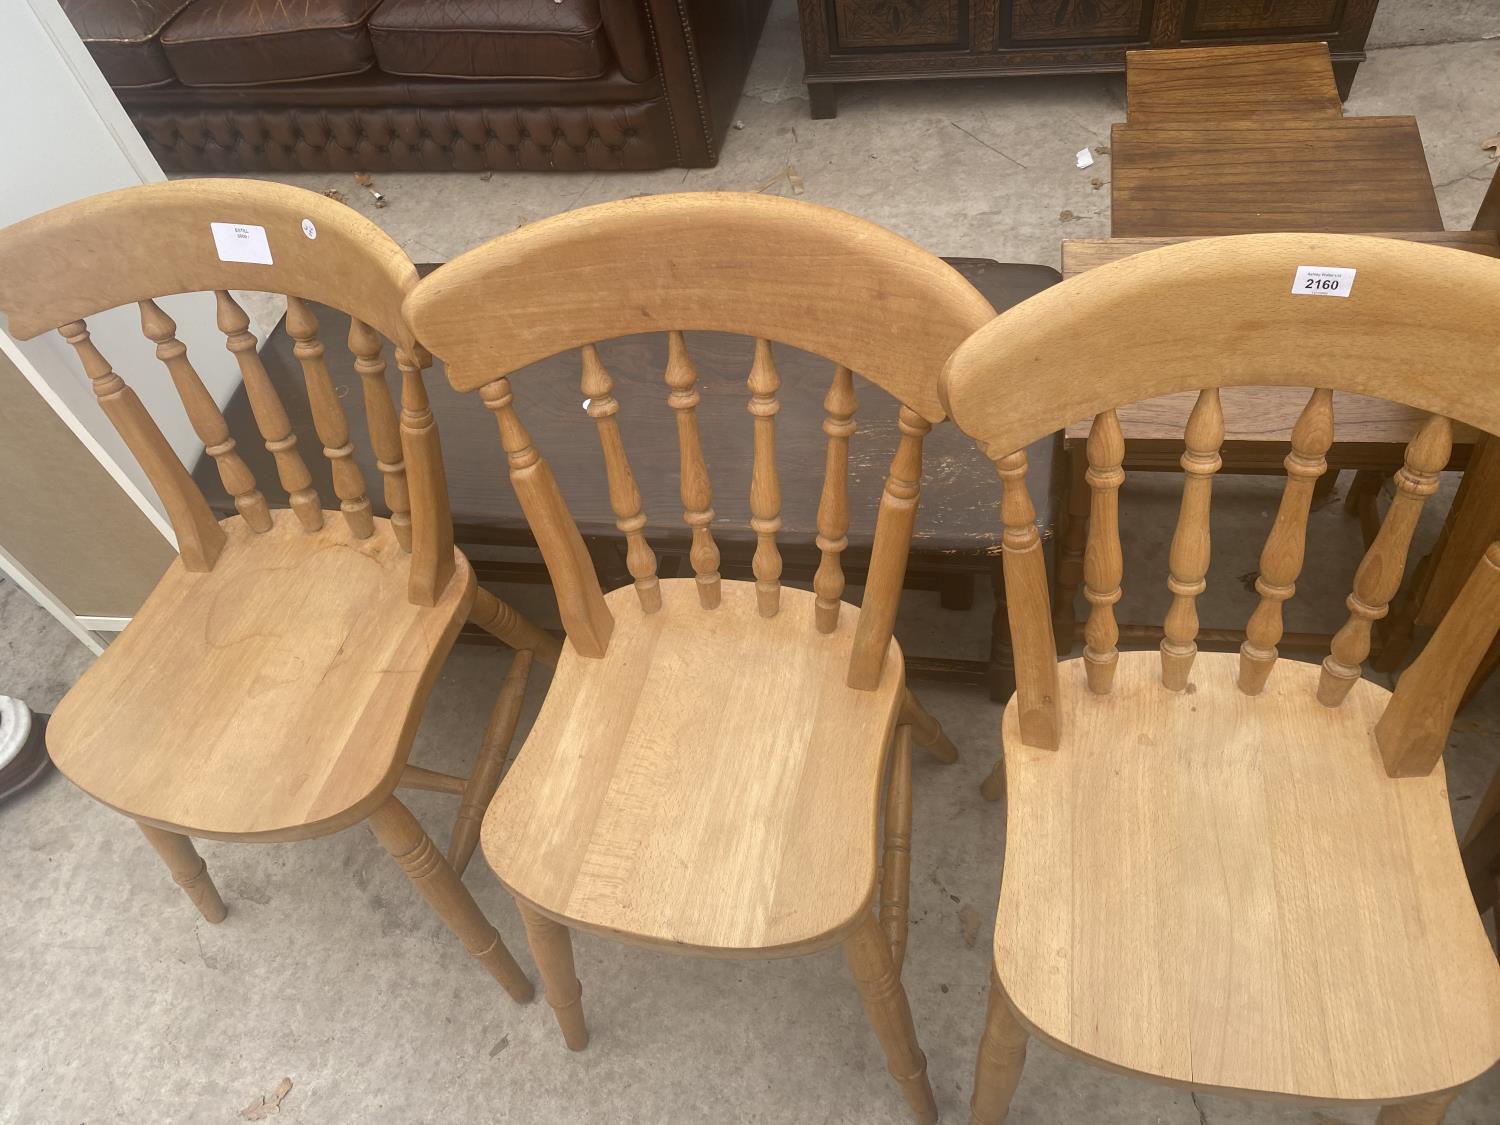 THREE VICTORIAN STYLE KITCHEN CHAIRS - Image 2 of 3